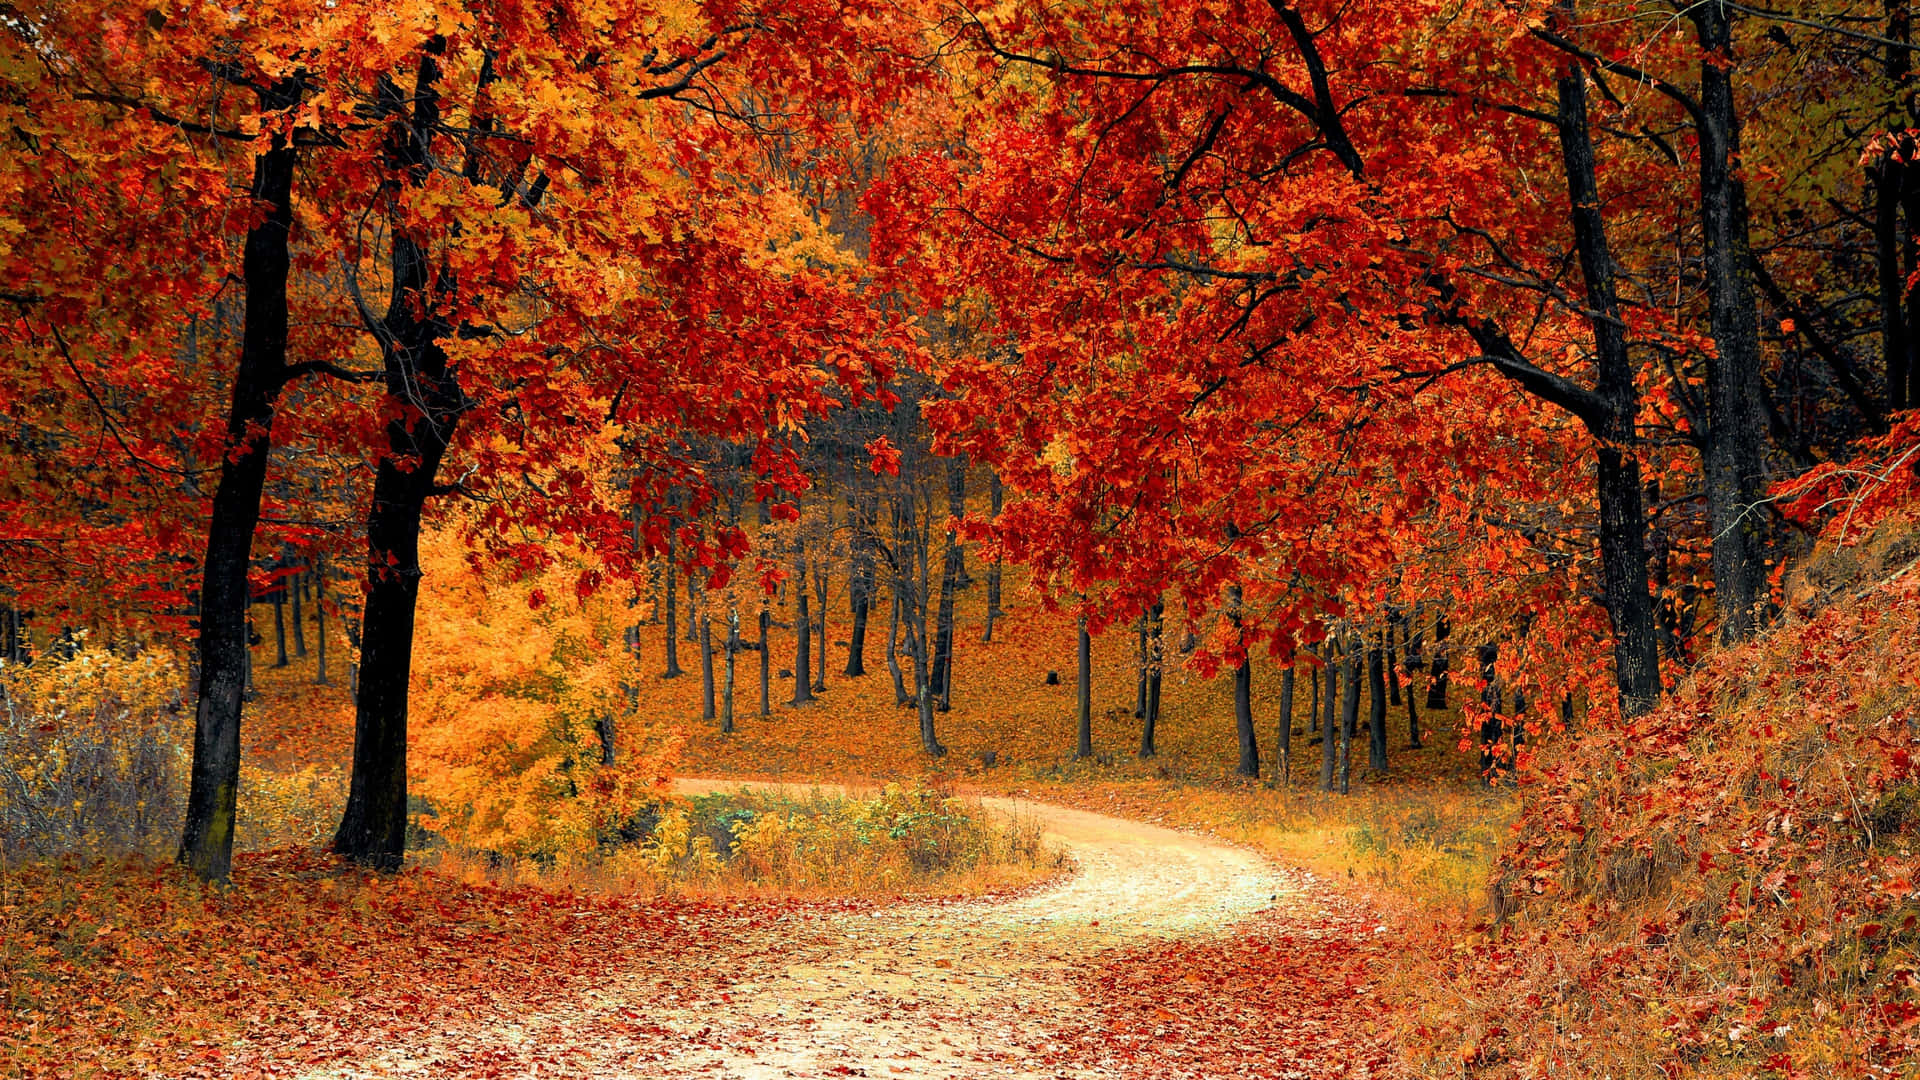 Enjoy the beauty of autumn in this 3840 x 2160 image Wallpaper